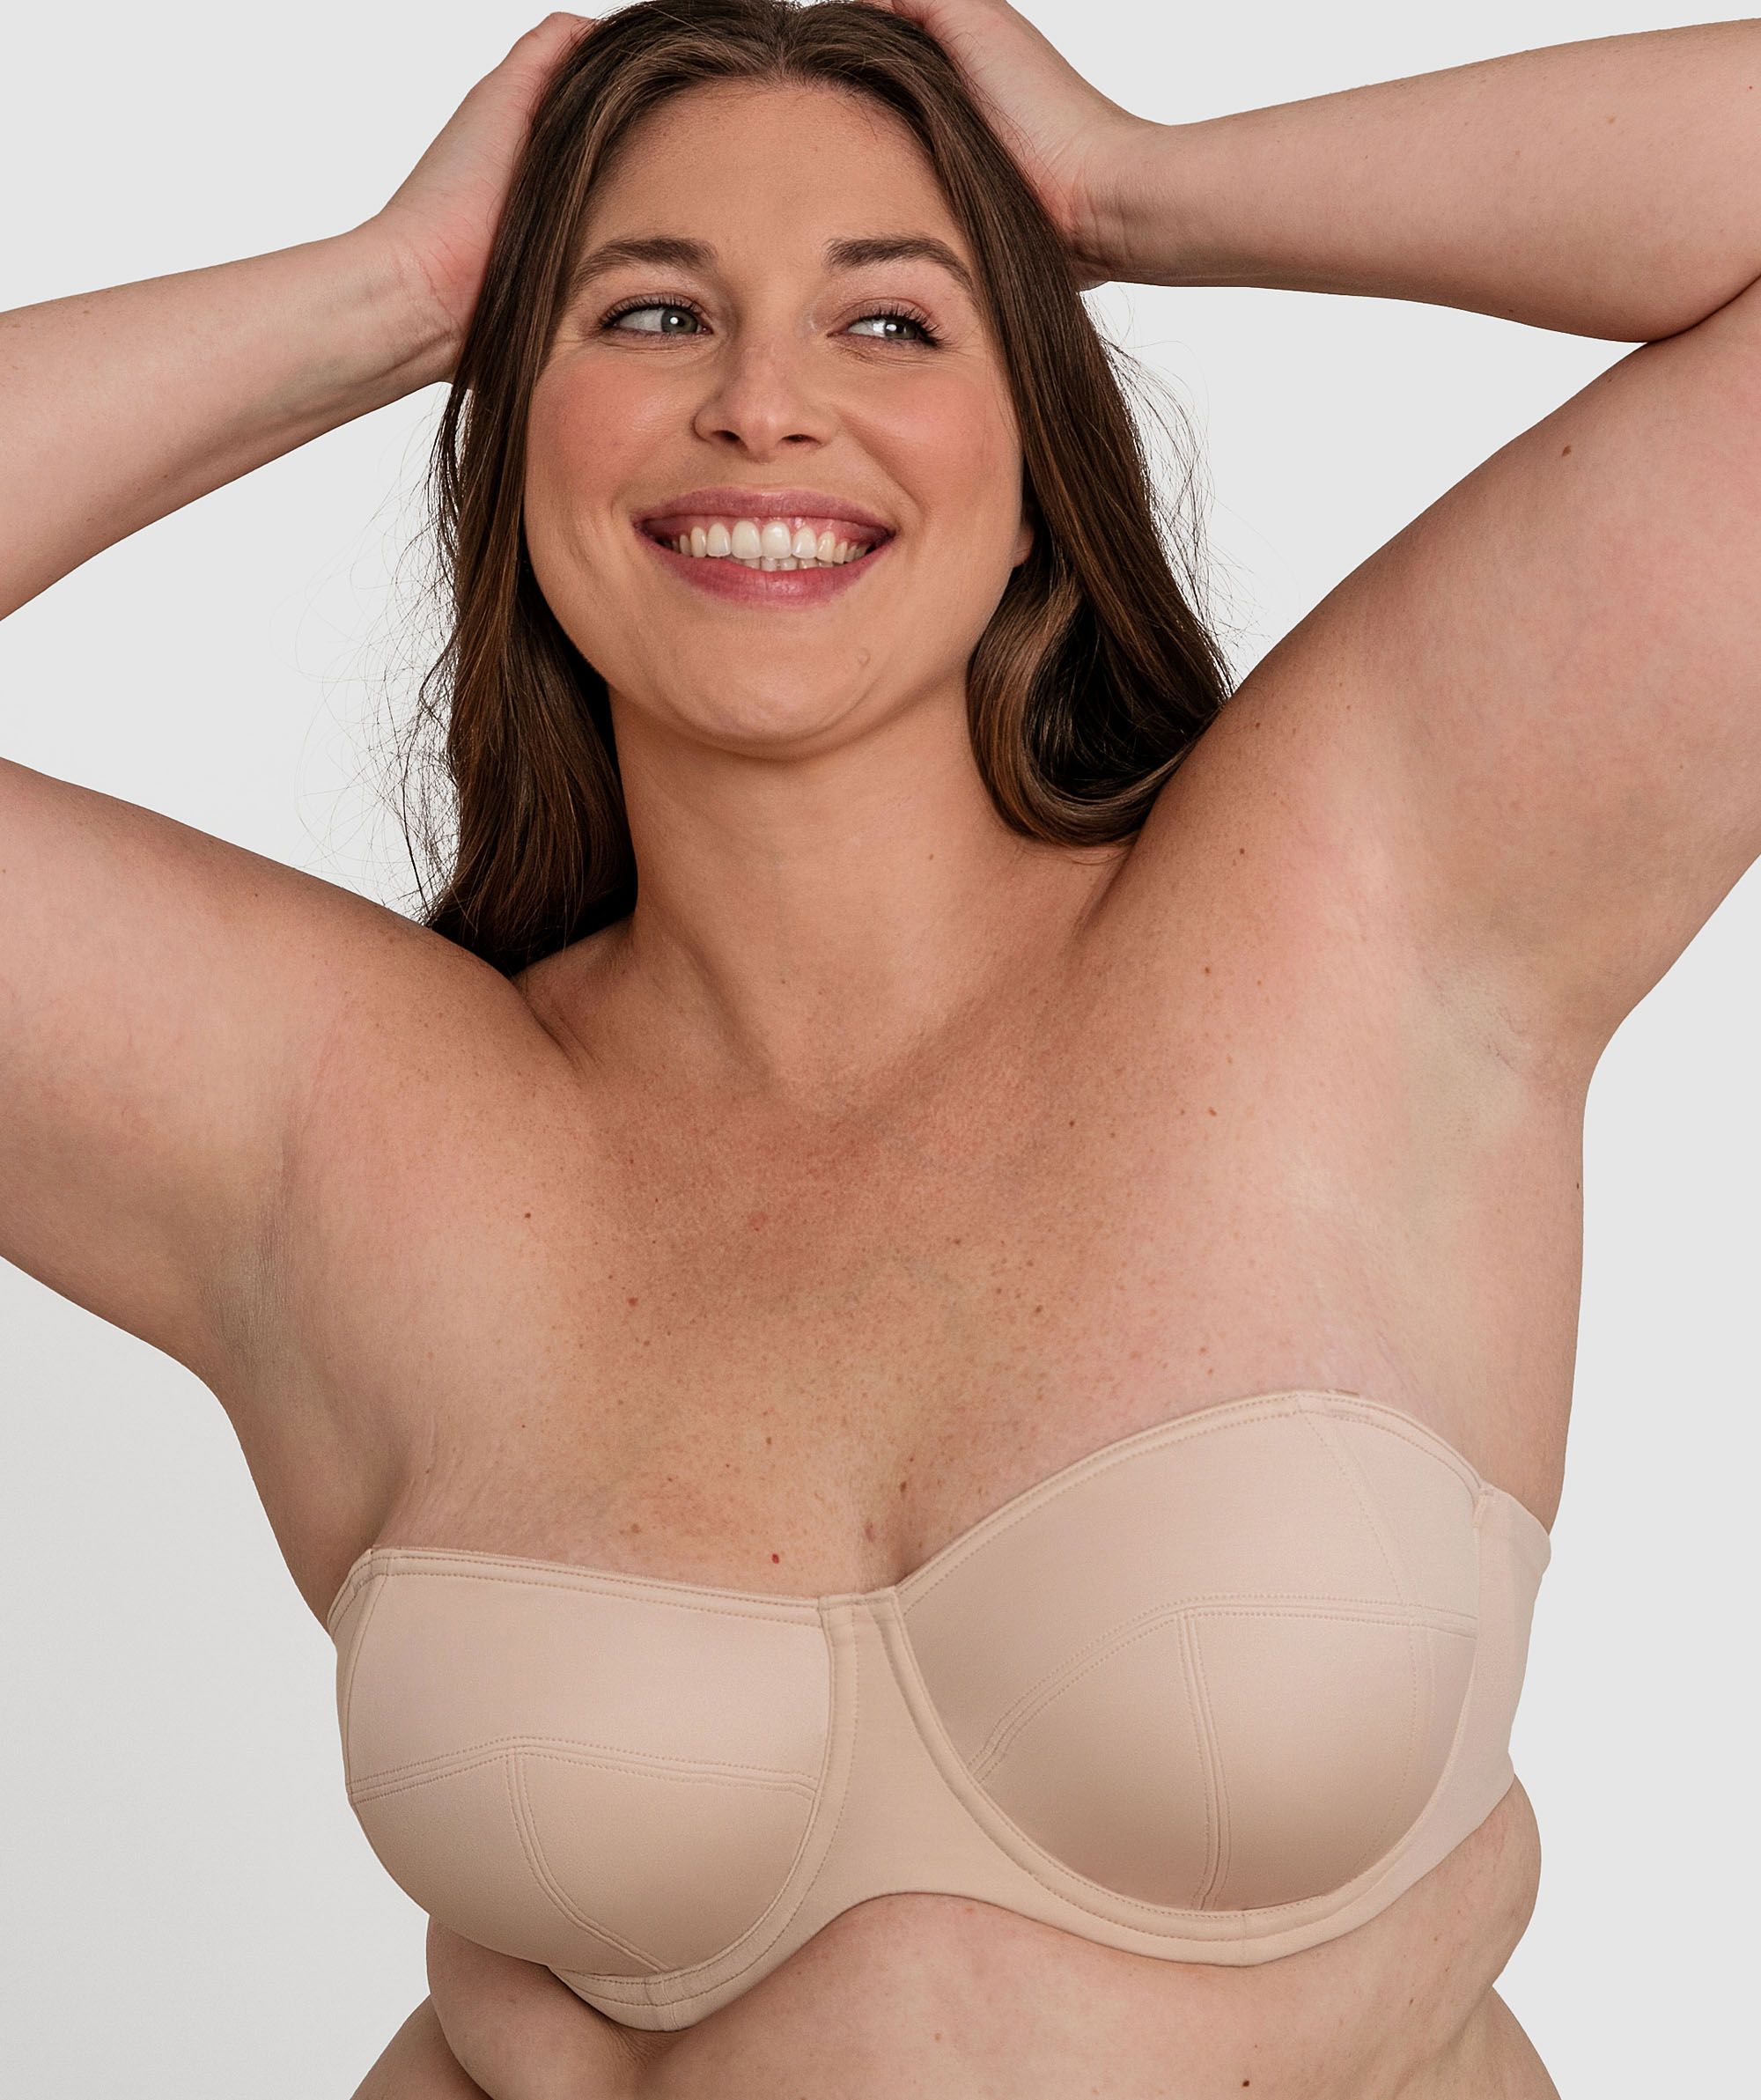 Body Bliss Wirefree Full Cup Bra